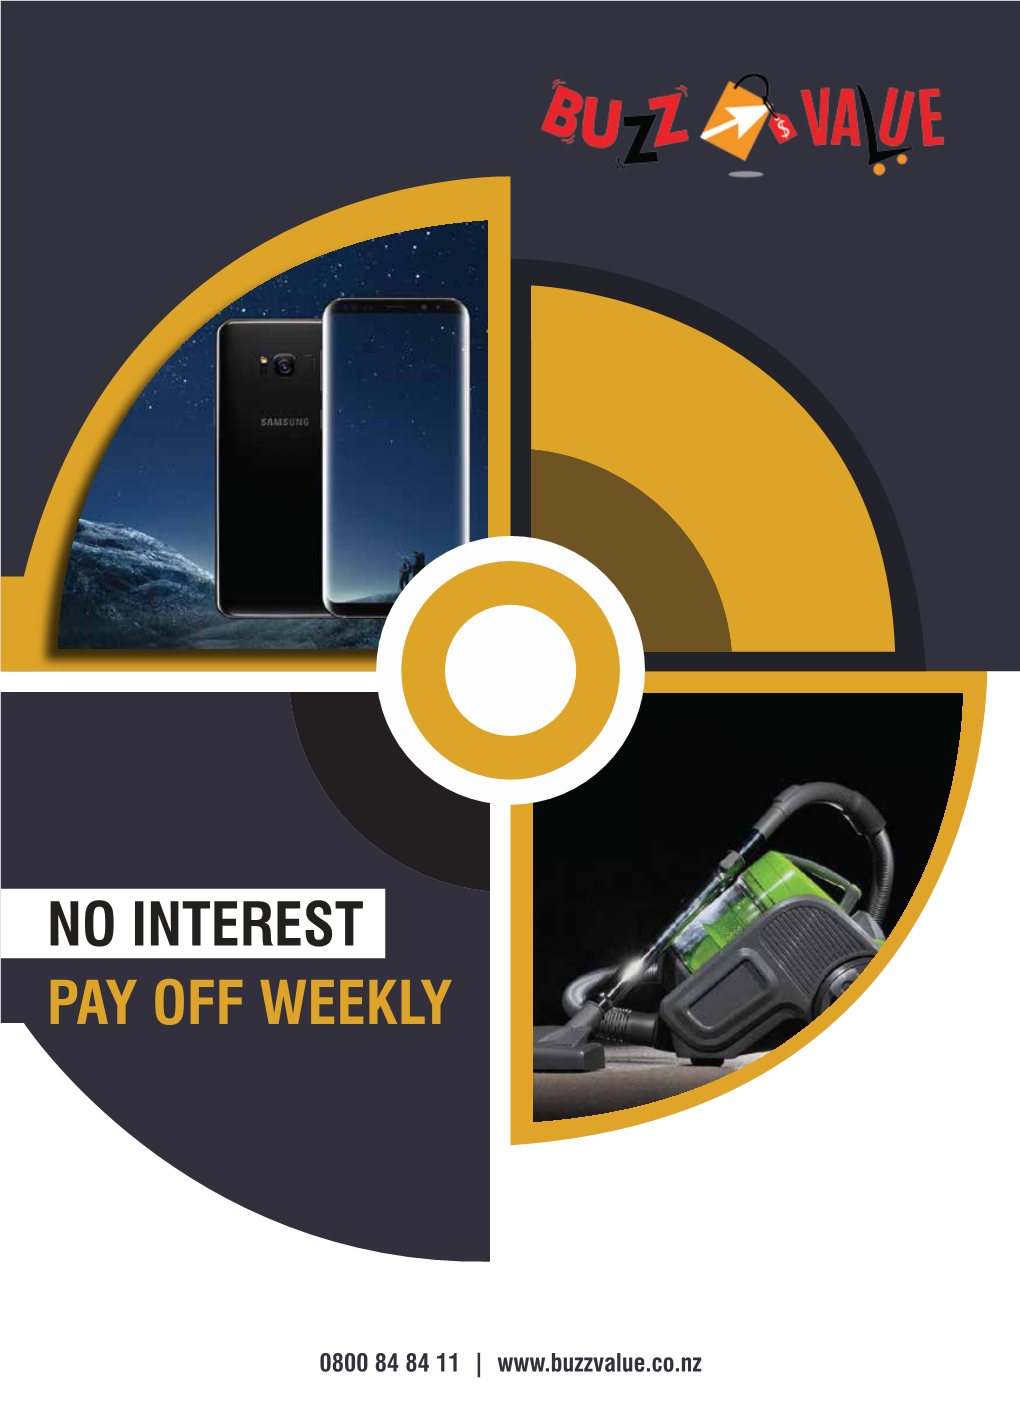 No Interest Pay Off Weekly